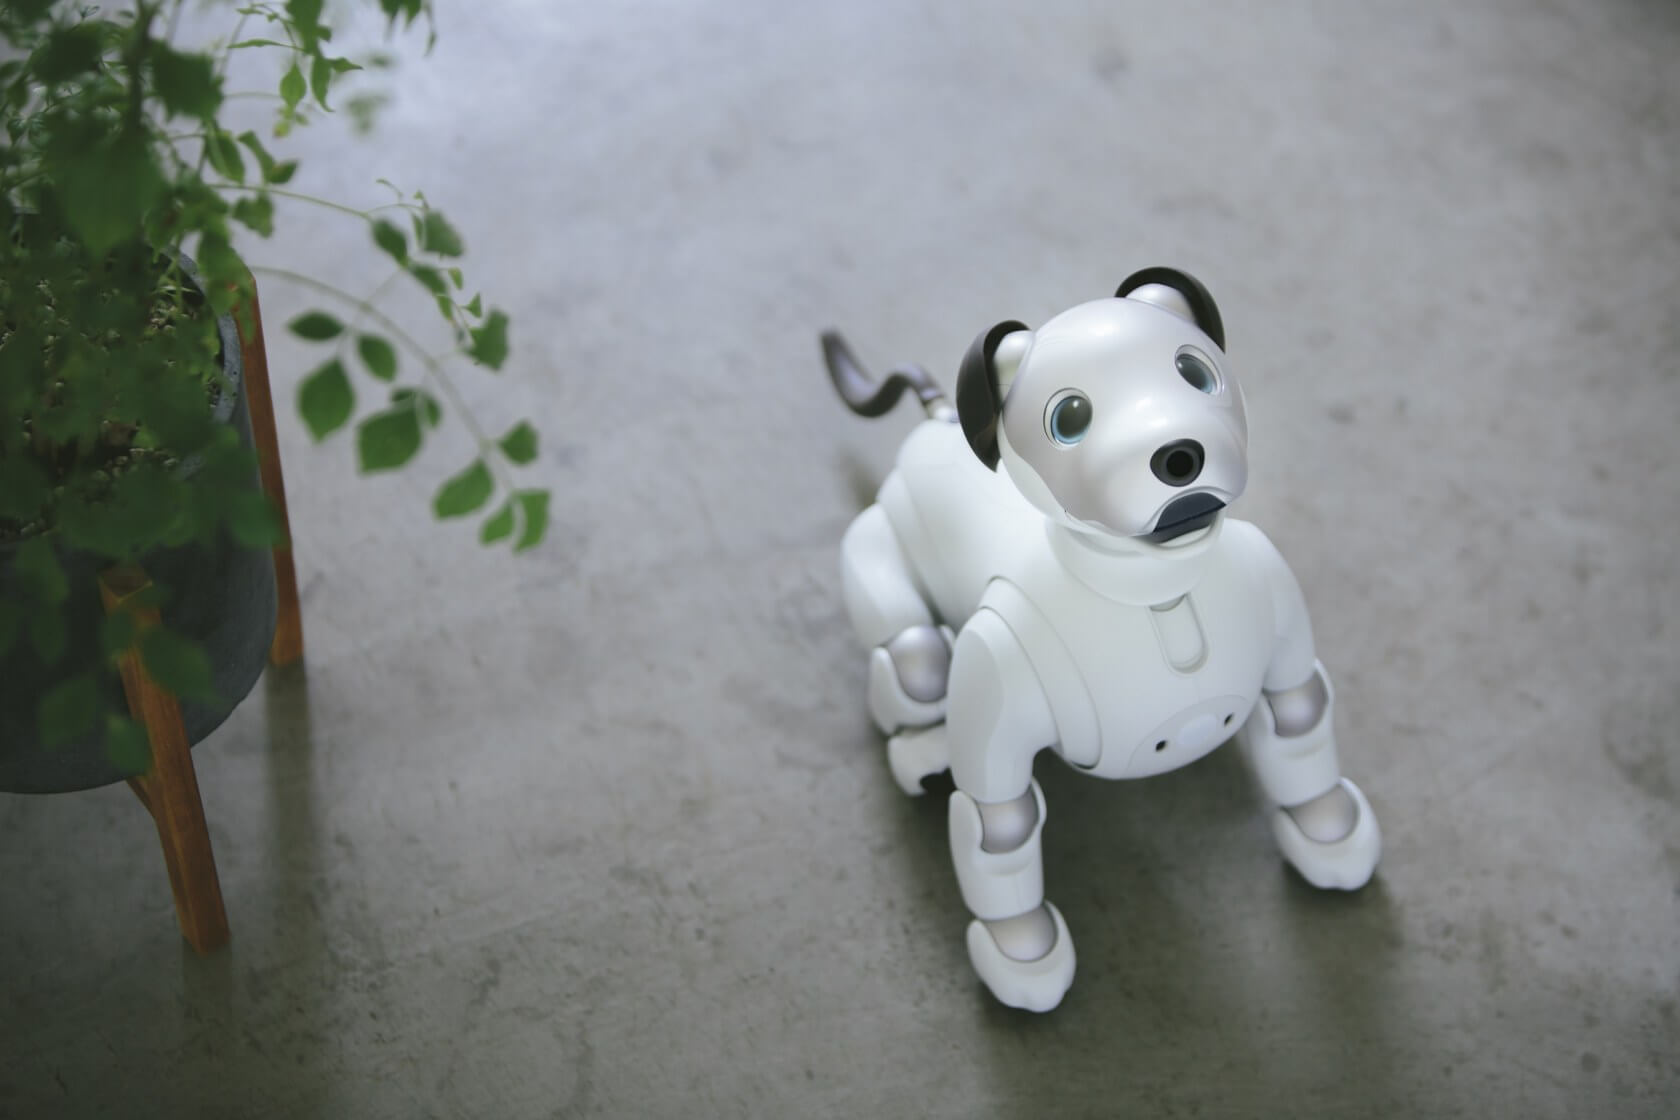 Sony's cyber pooch 'Aibo' will see a US release later this year